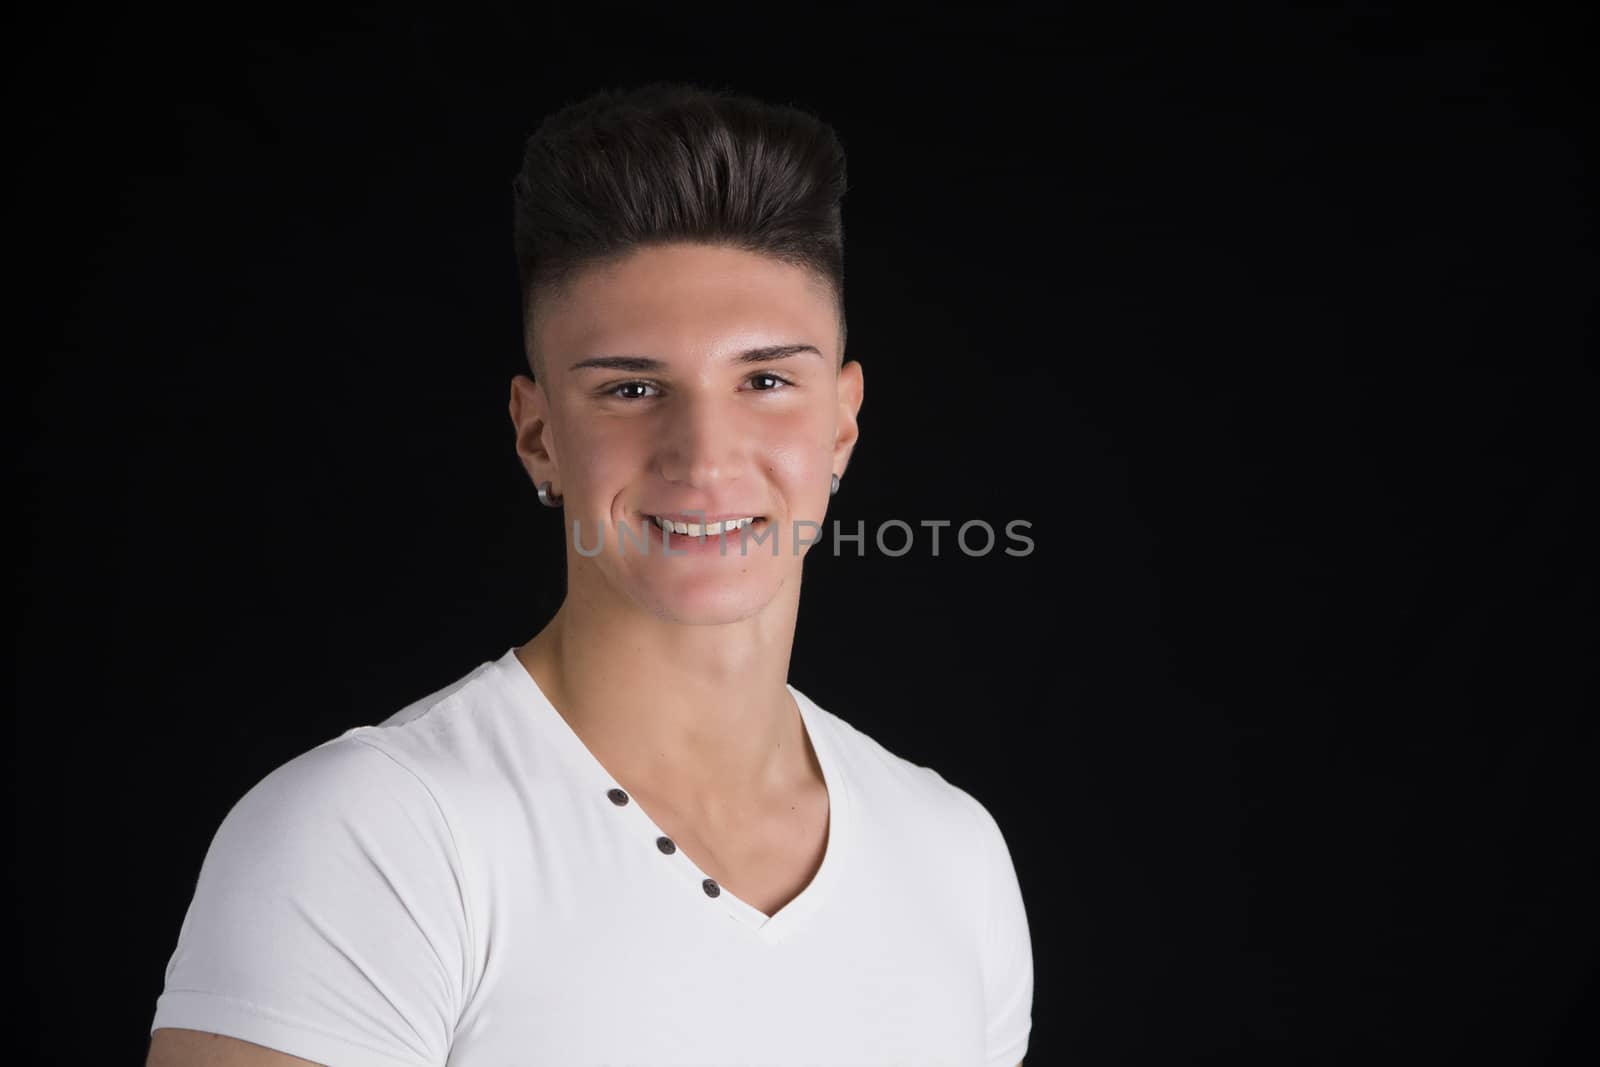 Head and shoulders portrait of smiling handsome young man on black background